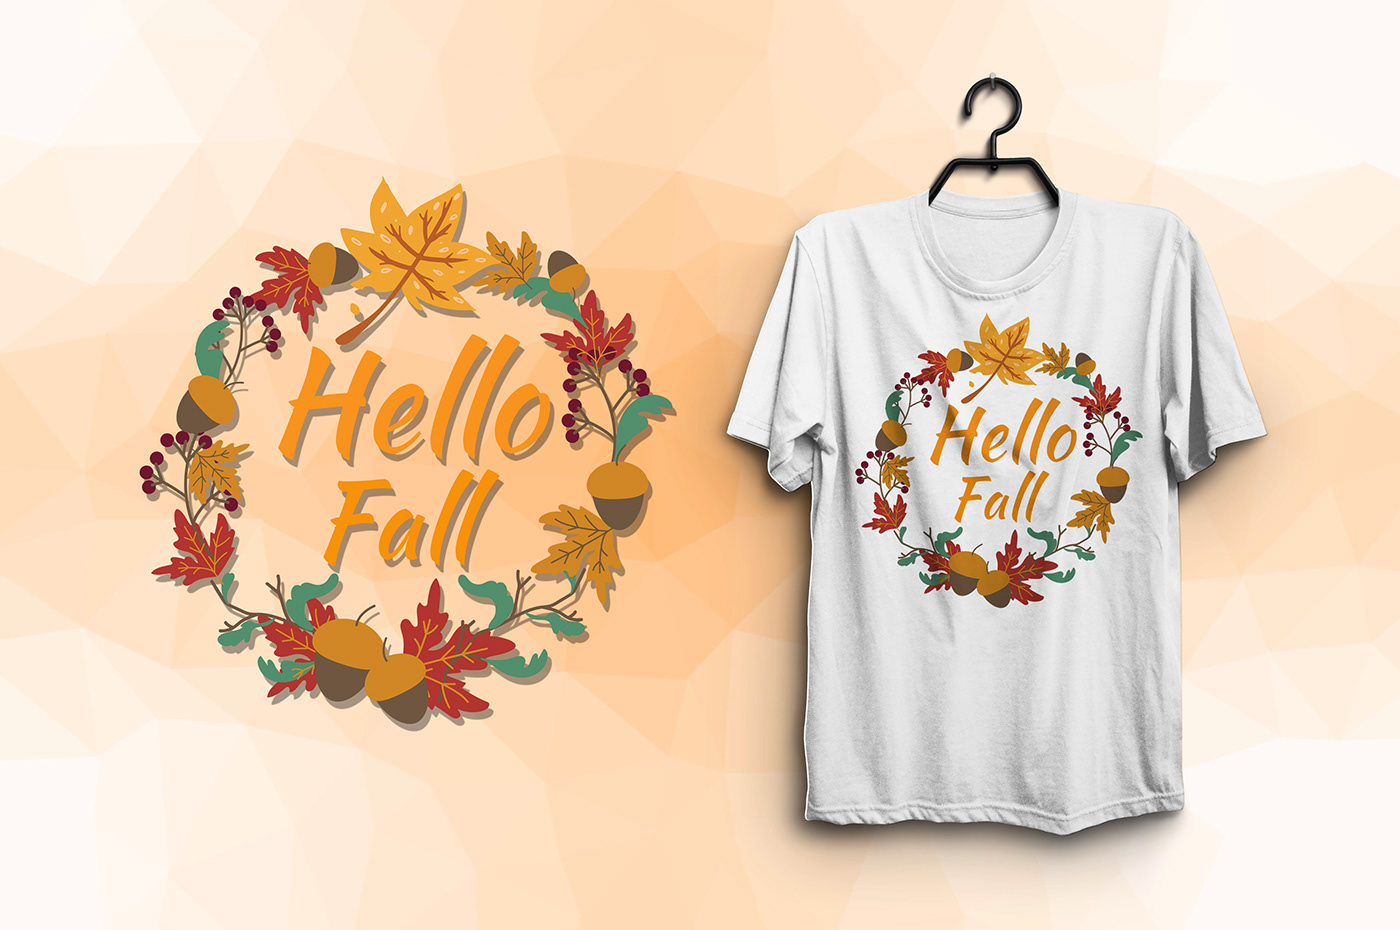 Extraordinary beautiful Fall session tshirt design shirts are beautiful and attractive for everyone.